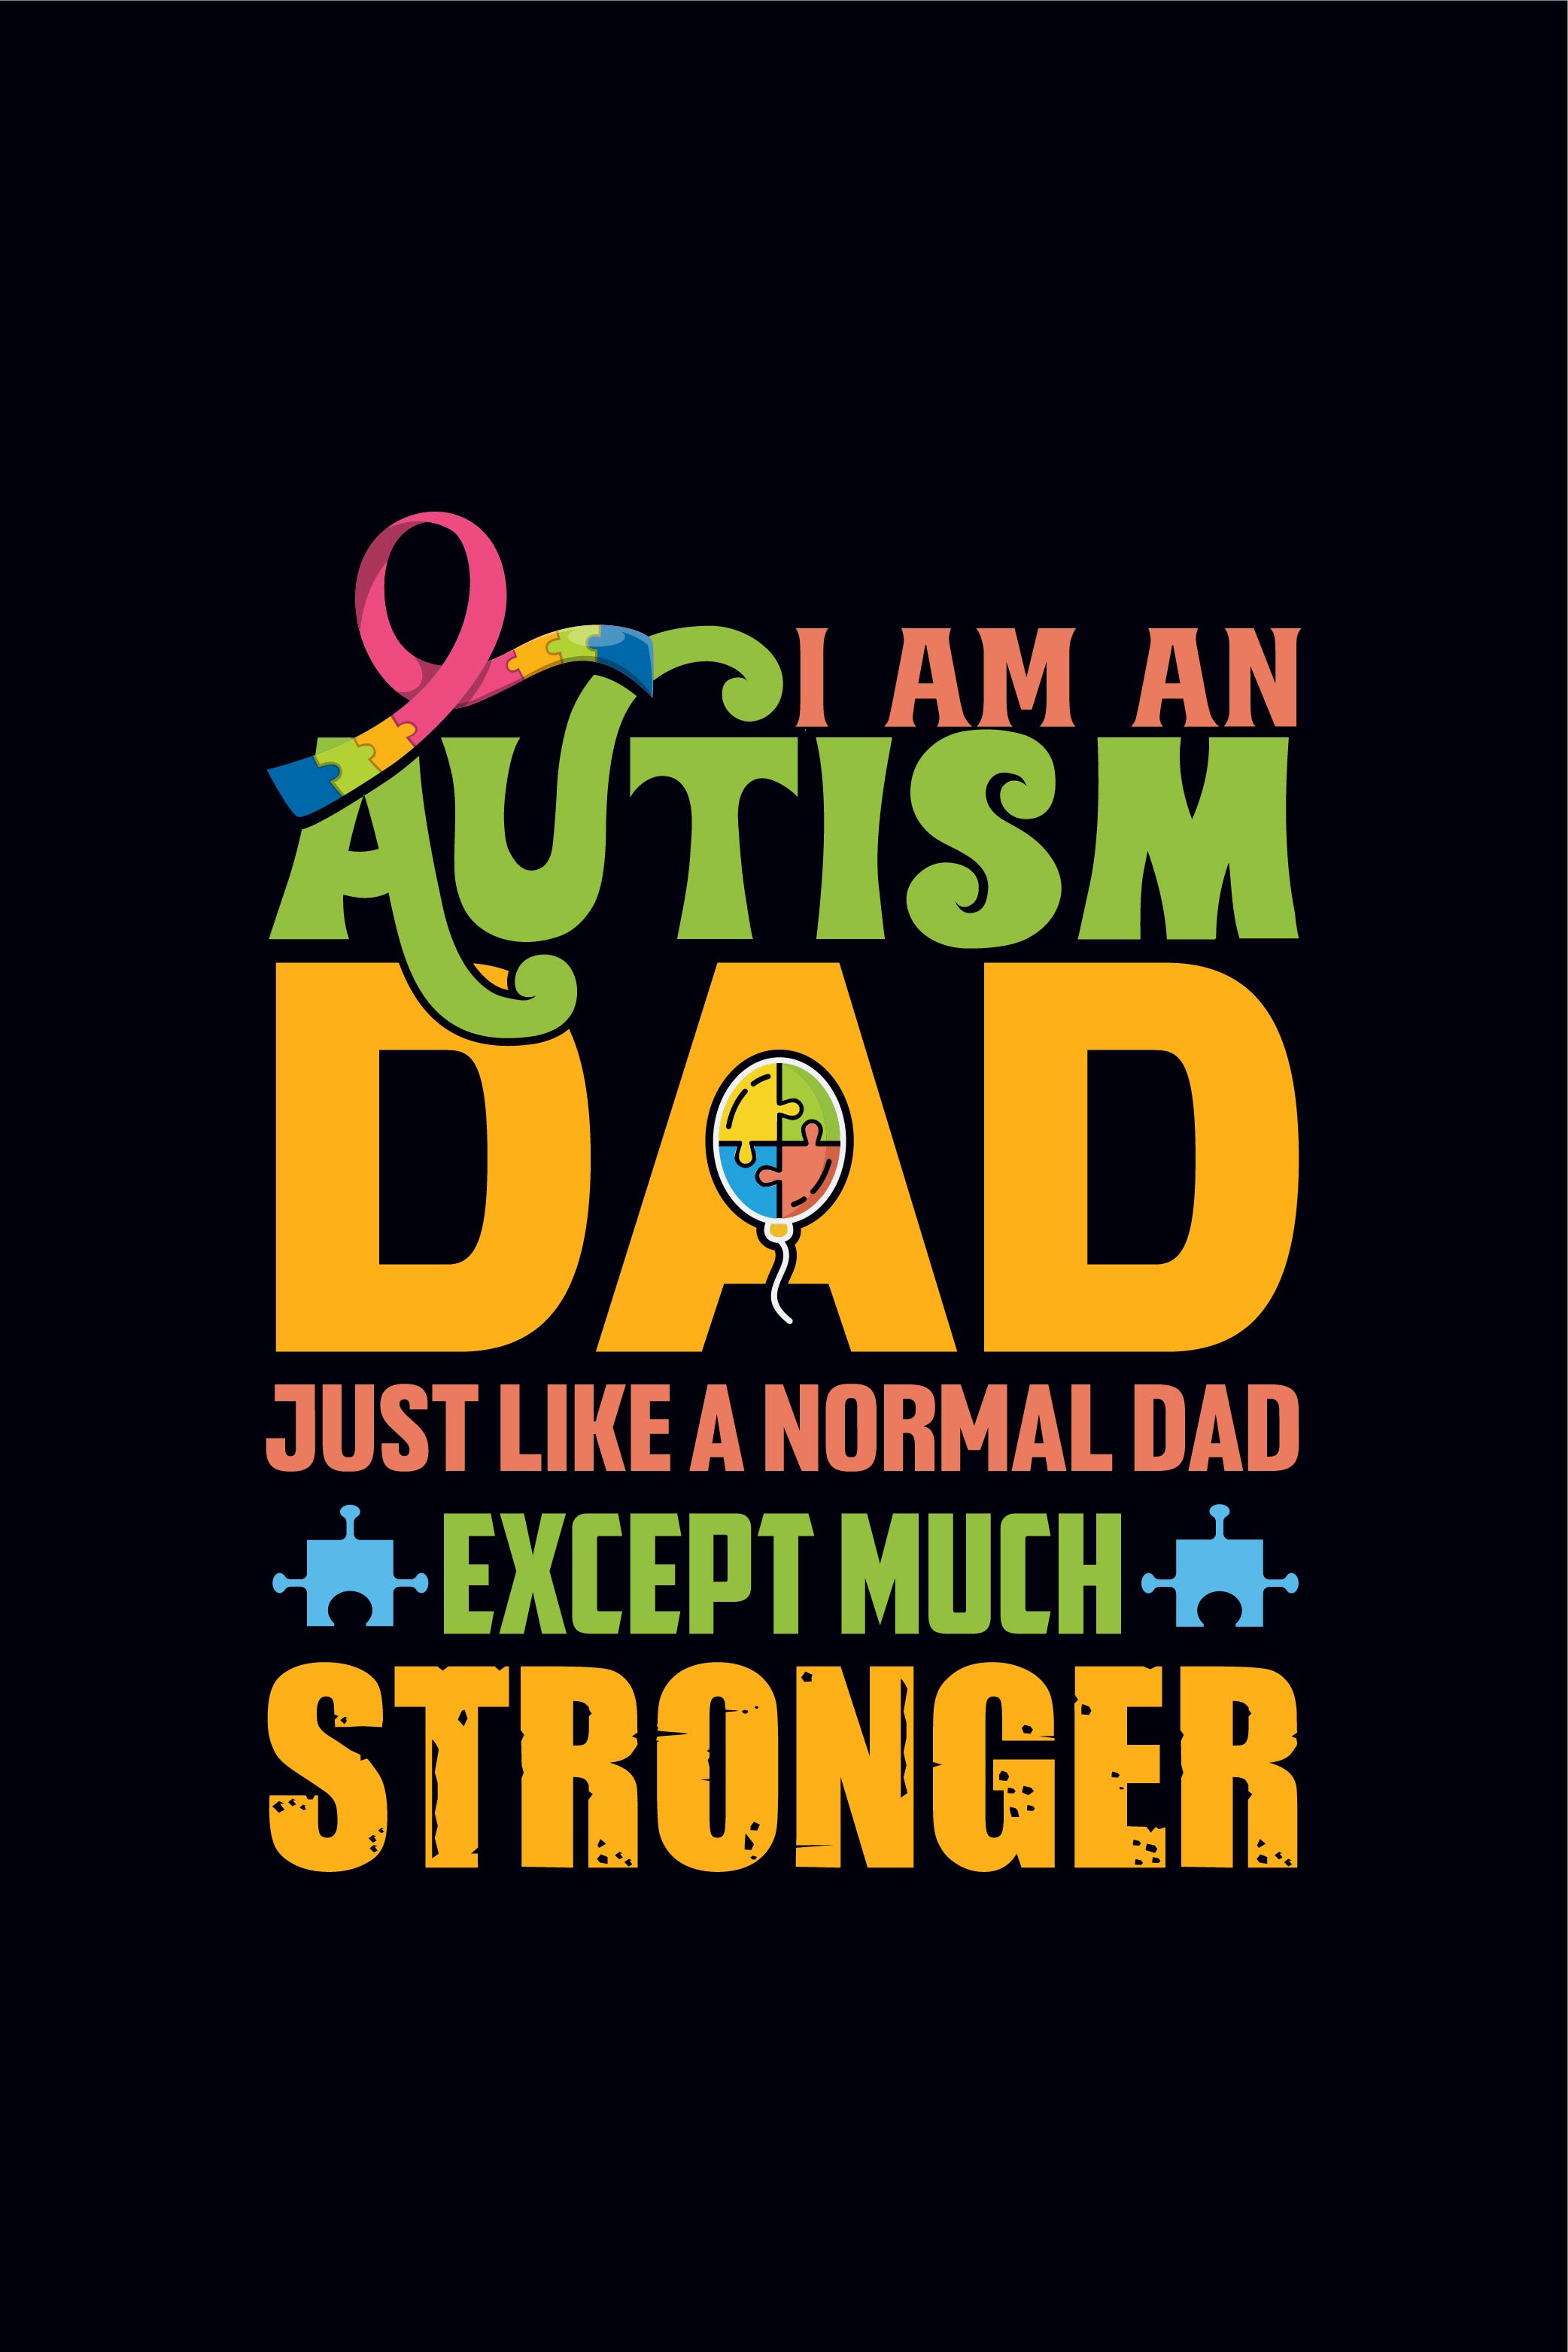 I am autism dad, Just like a normal dad except much stronger Autism t-shirt design template pinterest preview image.